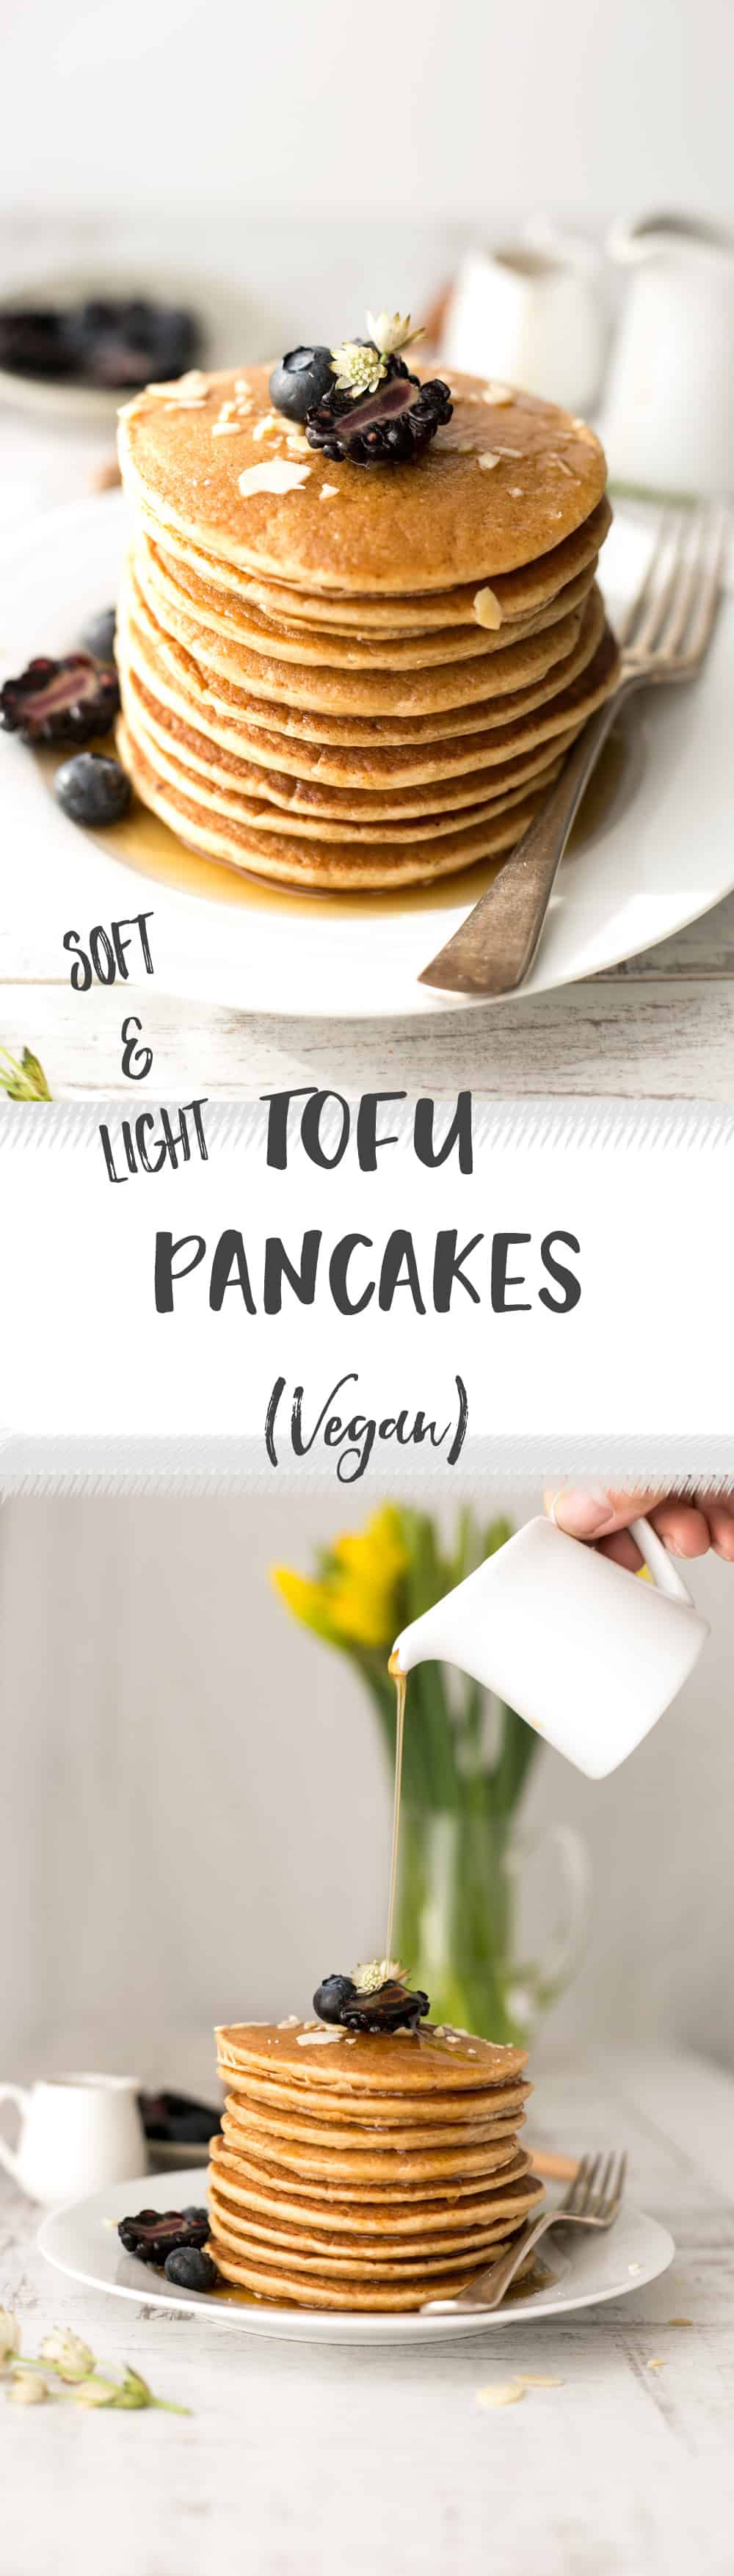 Incredibly soft and light tofu pancakes with maple syrup. Vegan and gluten- free! | via @annabanana.co